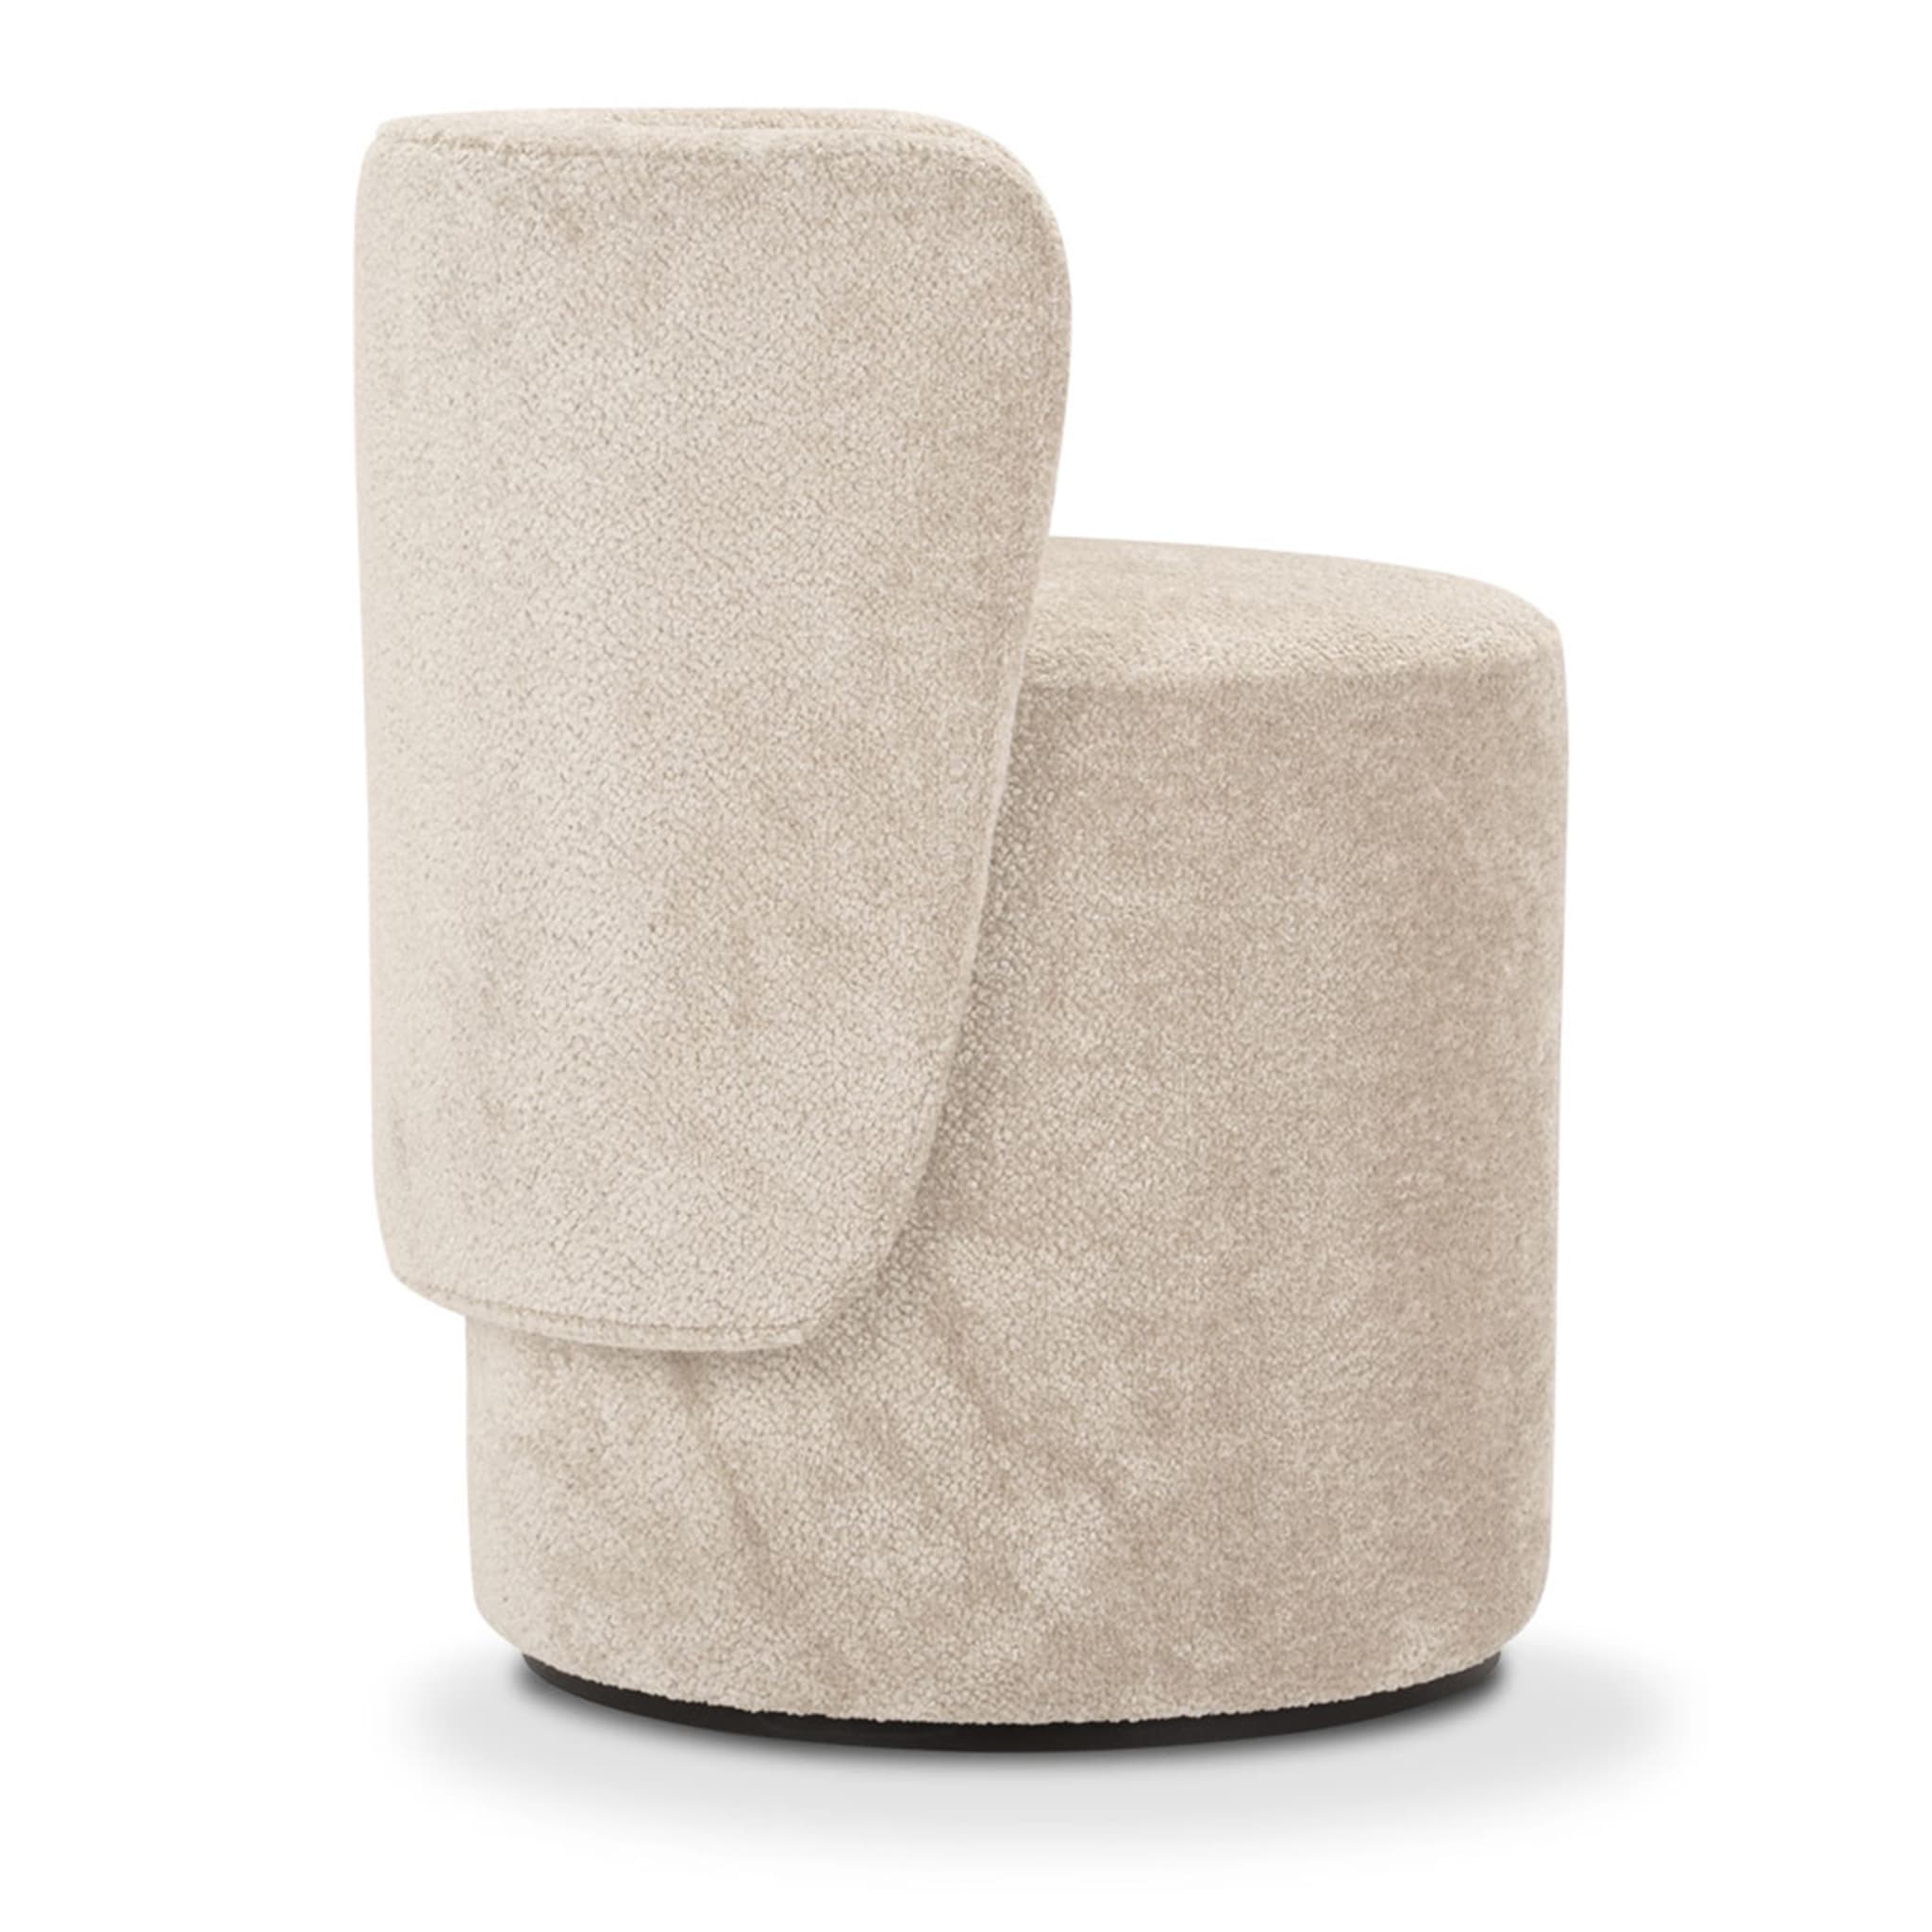 Boll Cylindrical Beige Textile Lounge Chair by Simone Micheli - Alternative view 2